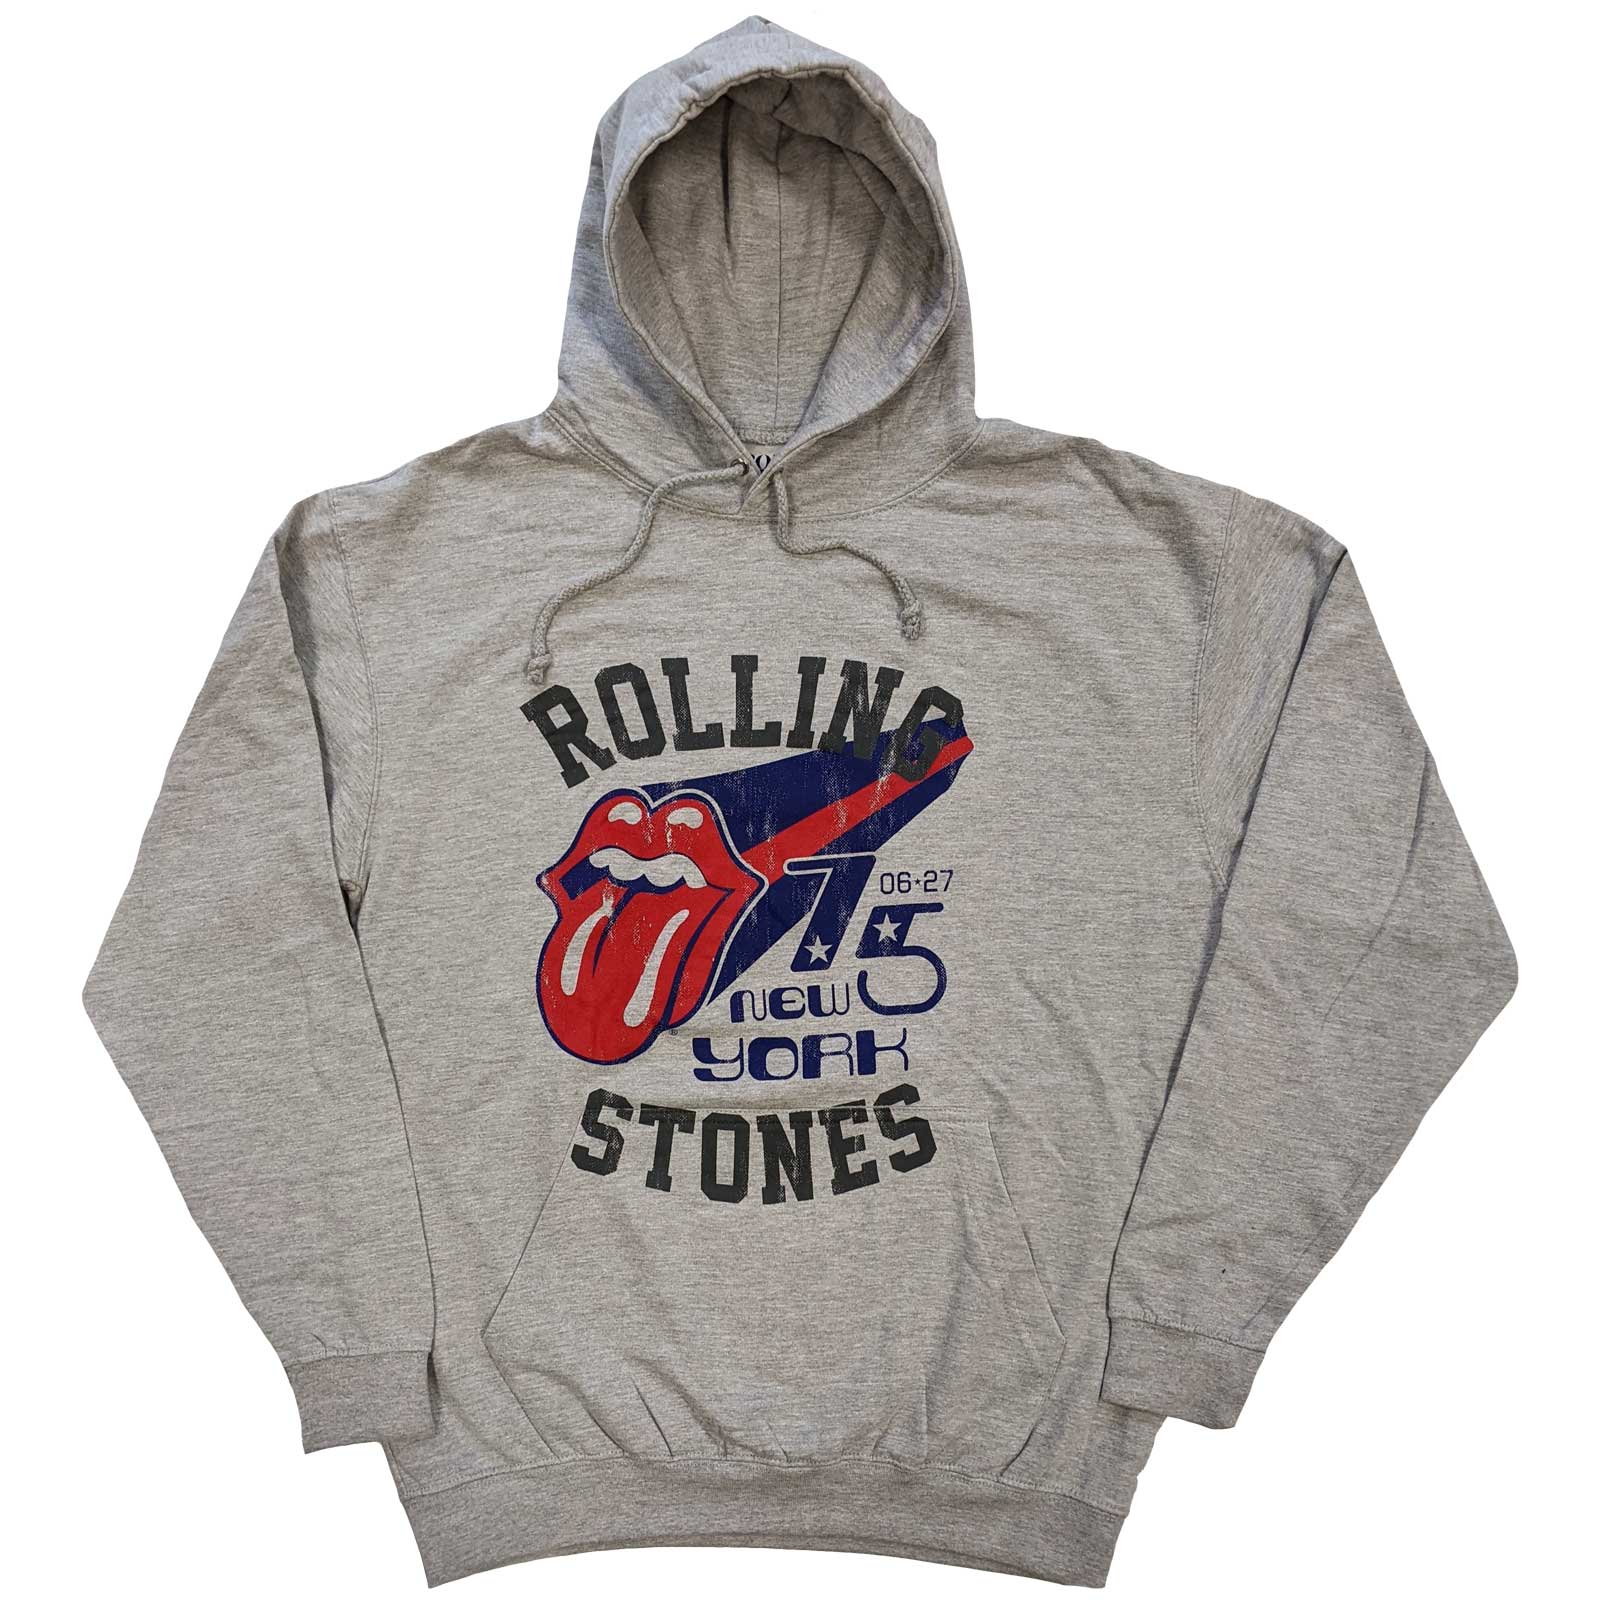 THE ROLLING STONES New York 75